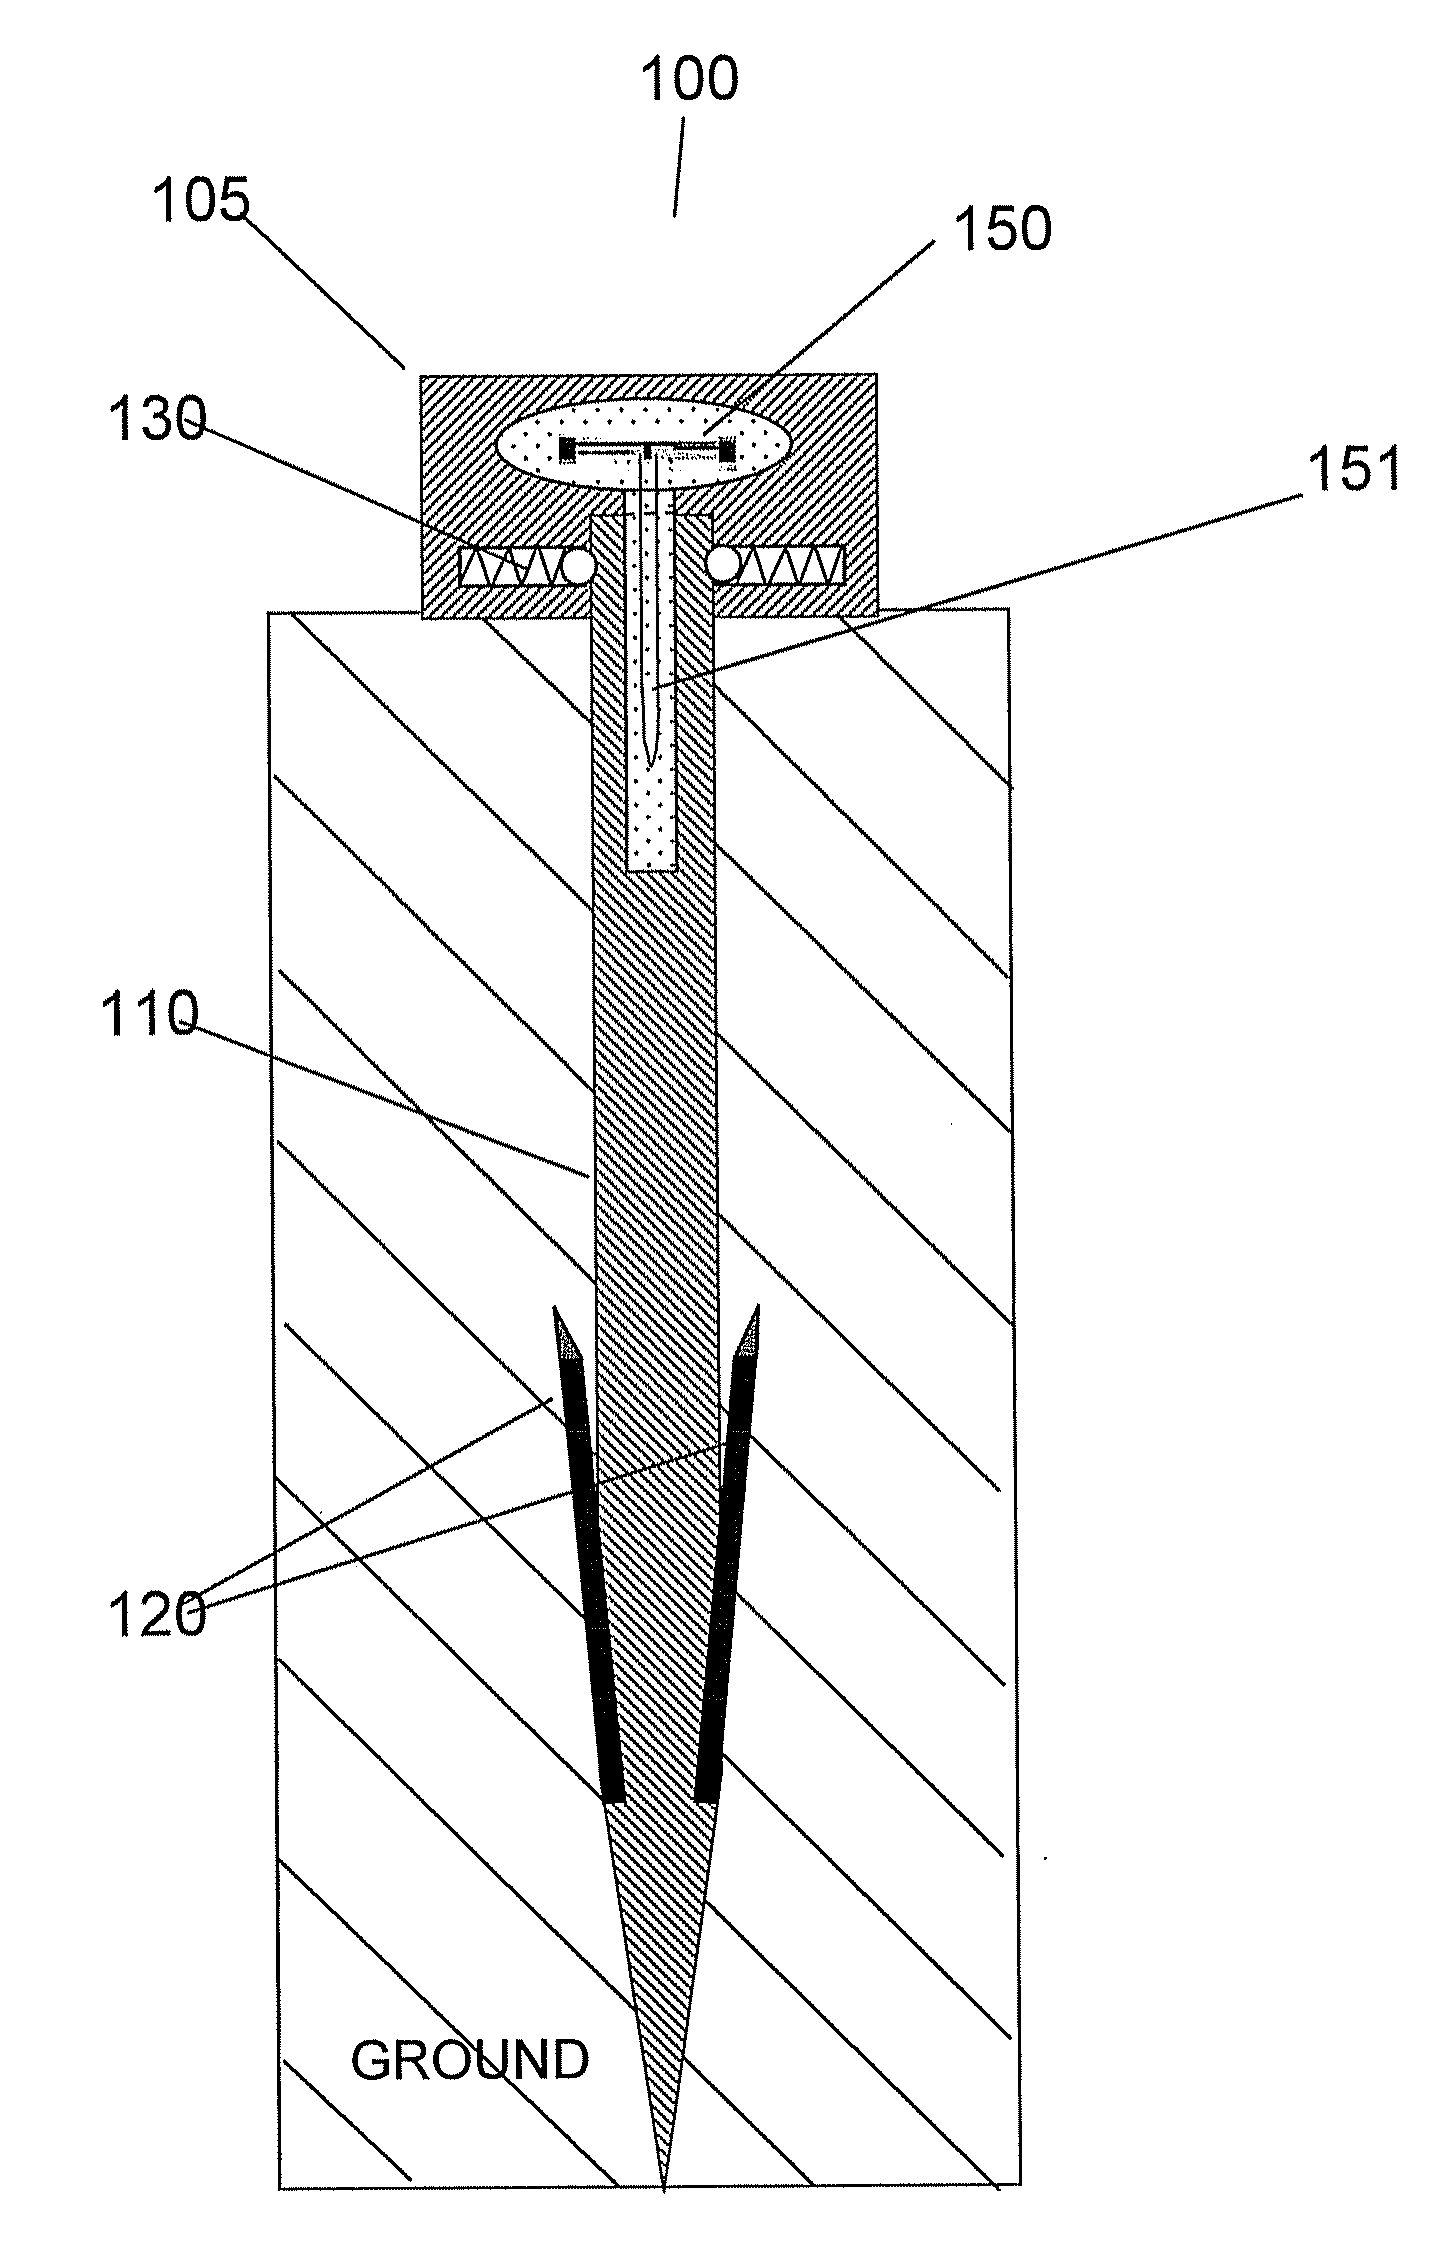 Apparatus for securing a land surveyor's mark based on the use of a radio frequency identifier tag